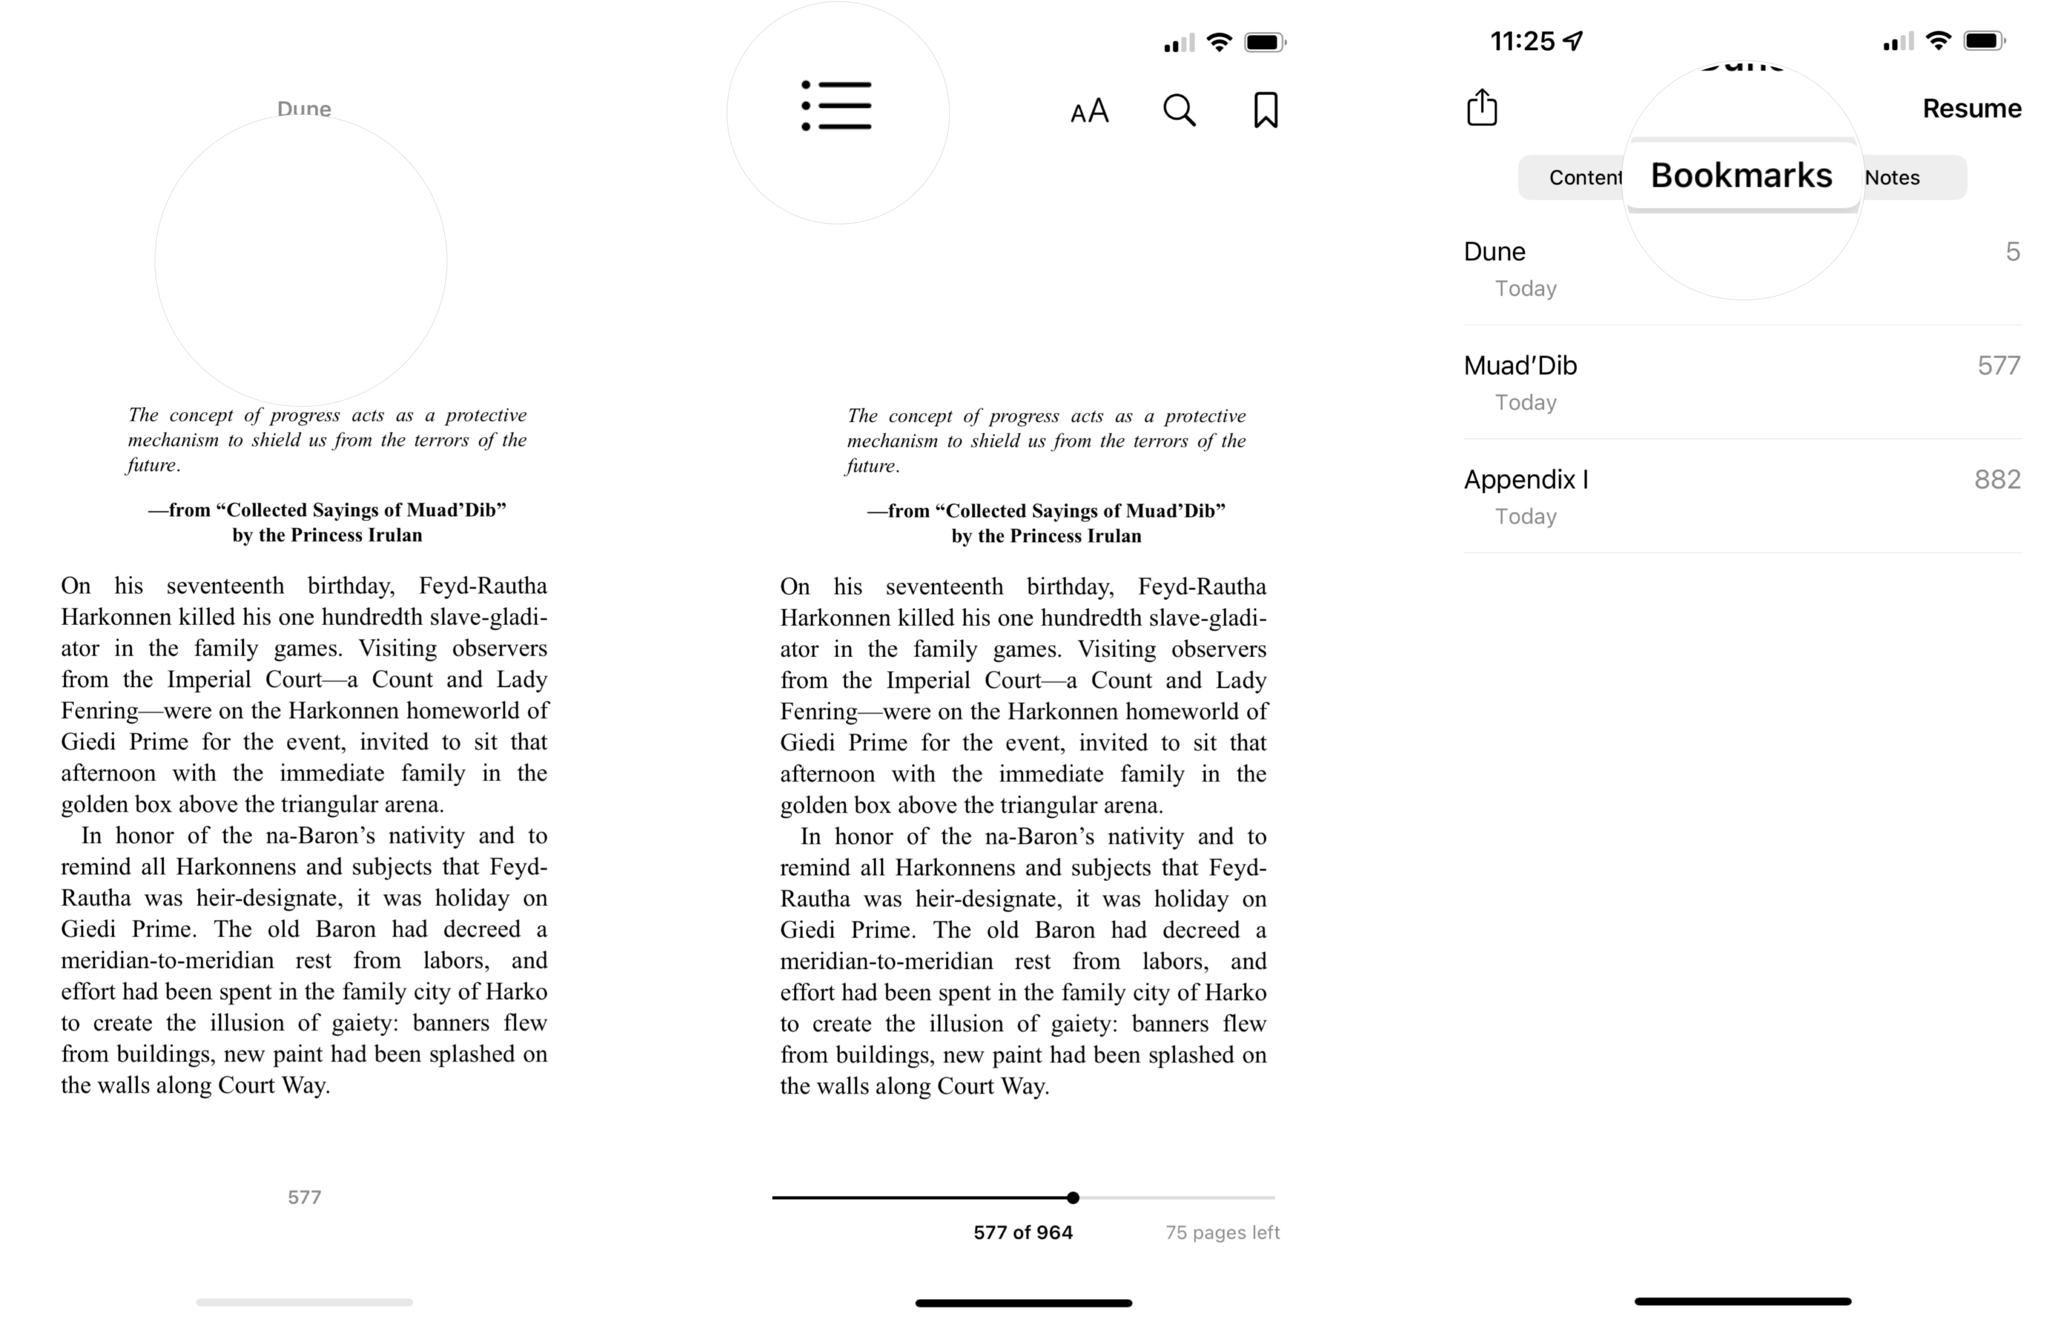 How to see a list of bookmarks in Apple Books: tap a blank part of the page to bring up the controls, tap the list icon, tap the Bookmarks tab